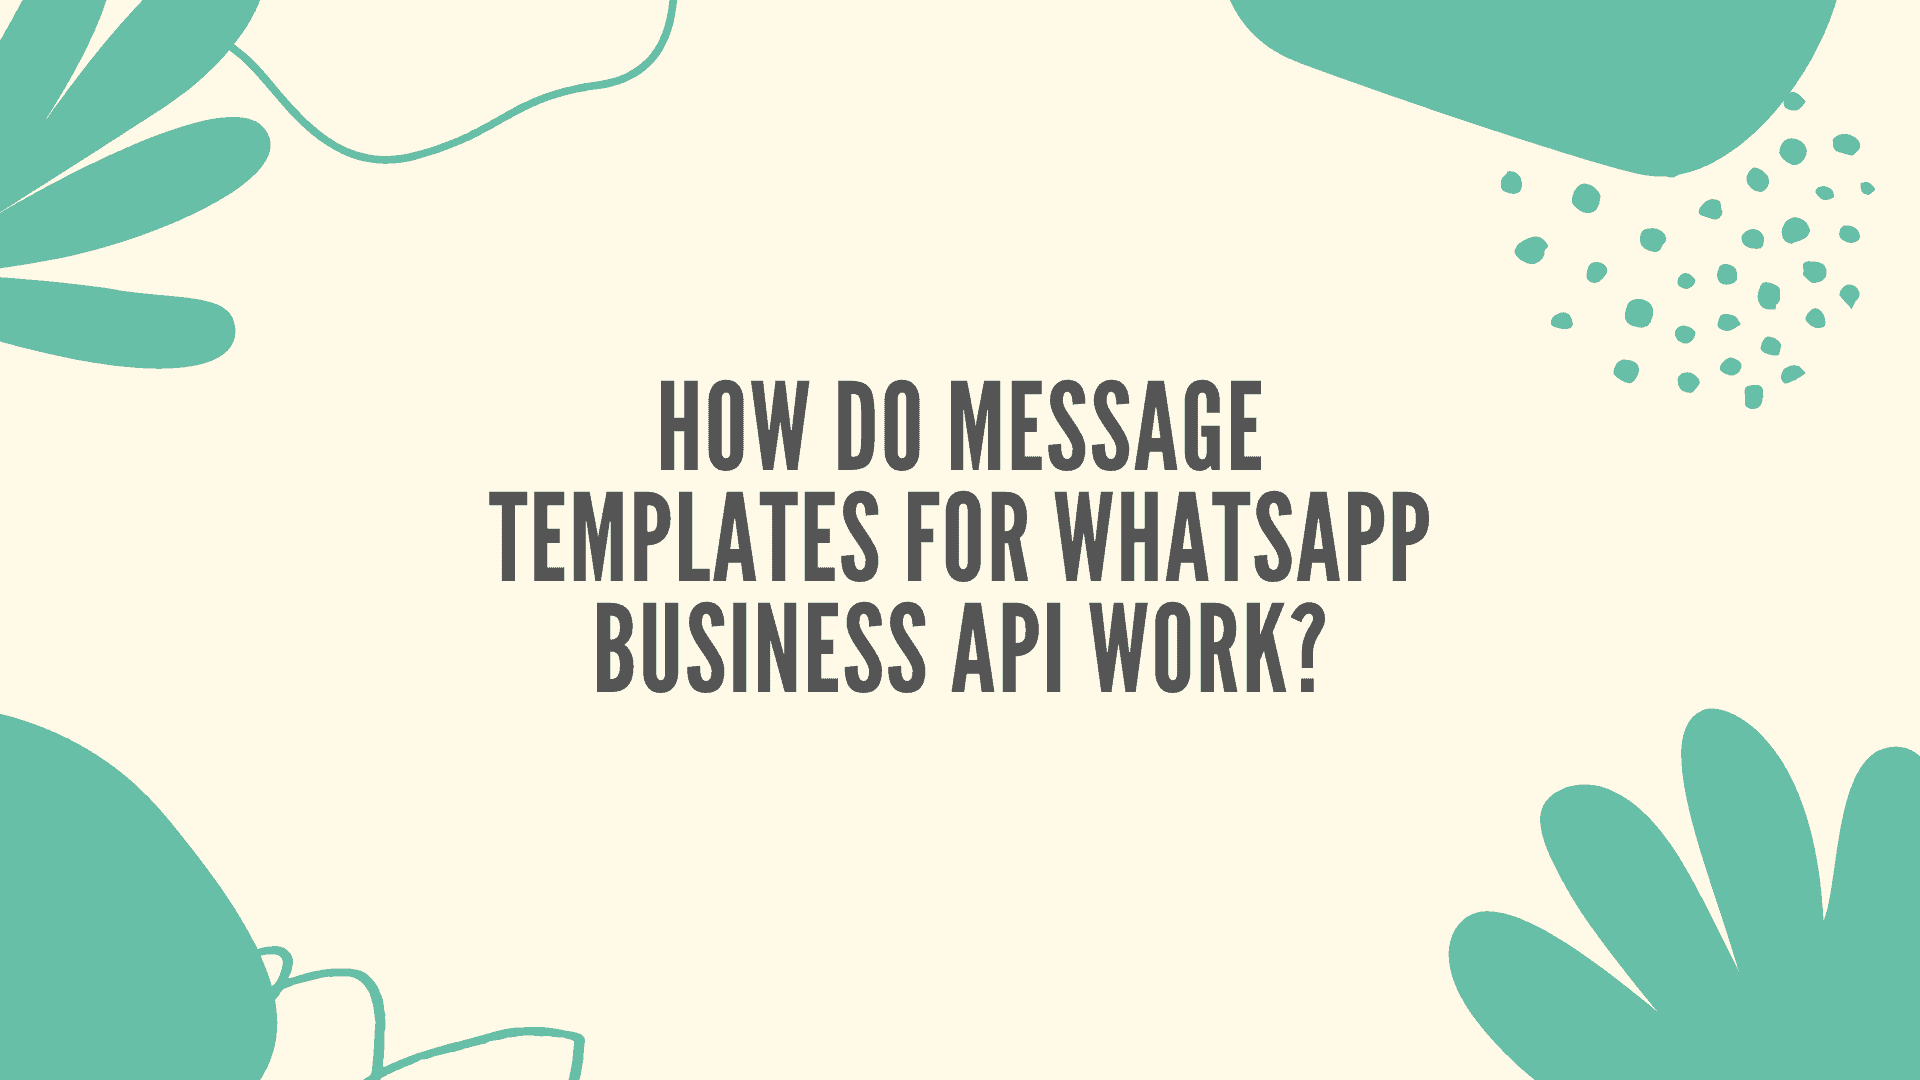 Message templates for WhatsApp Business API